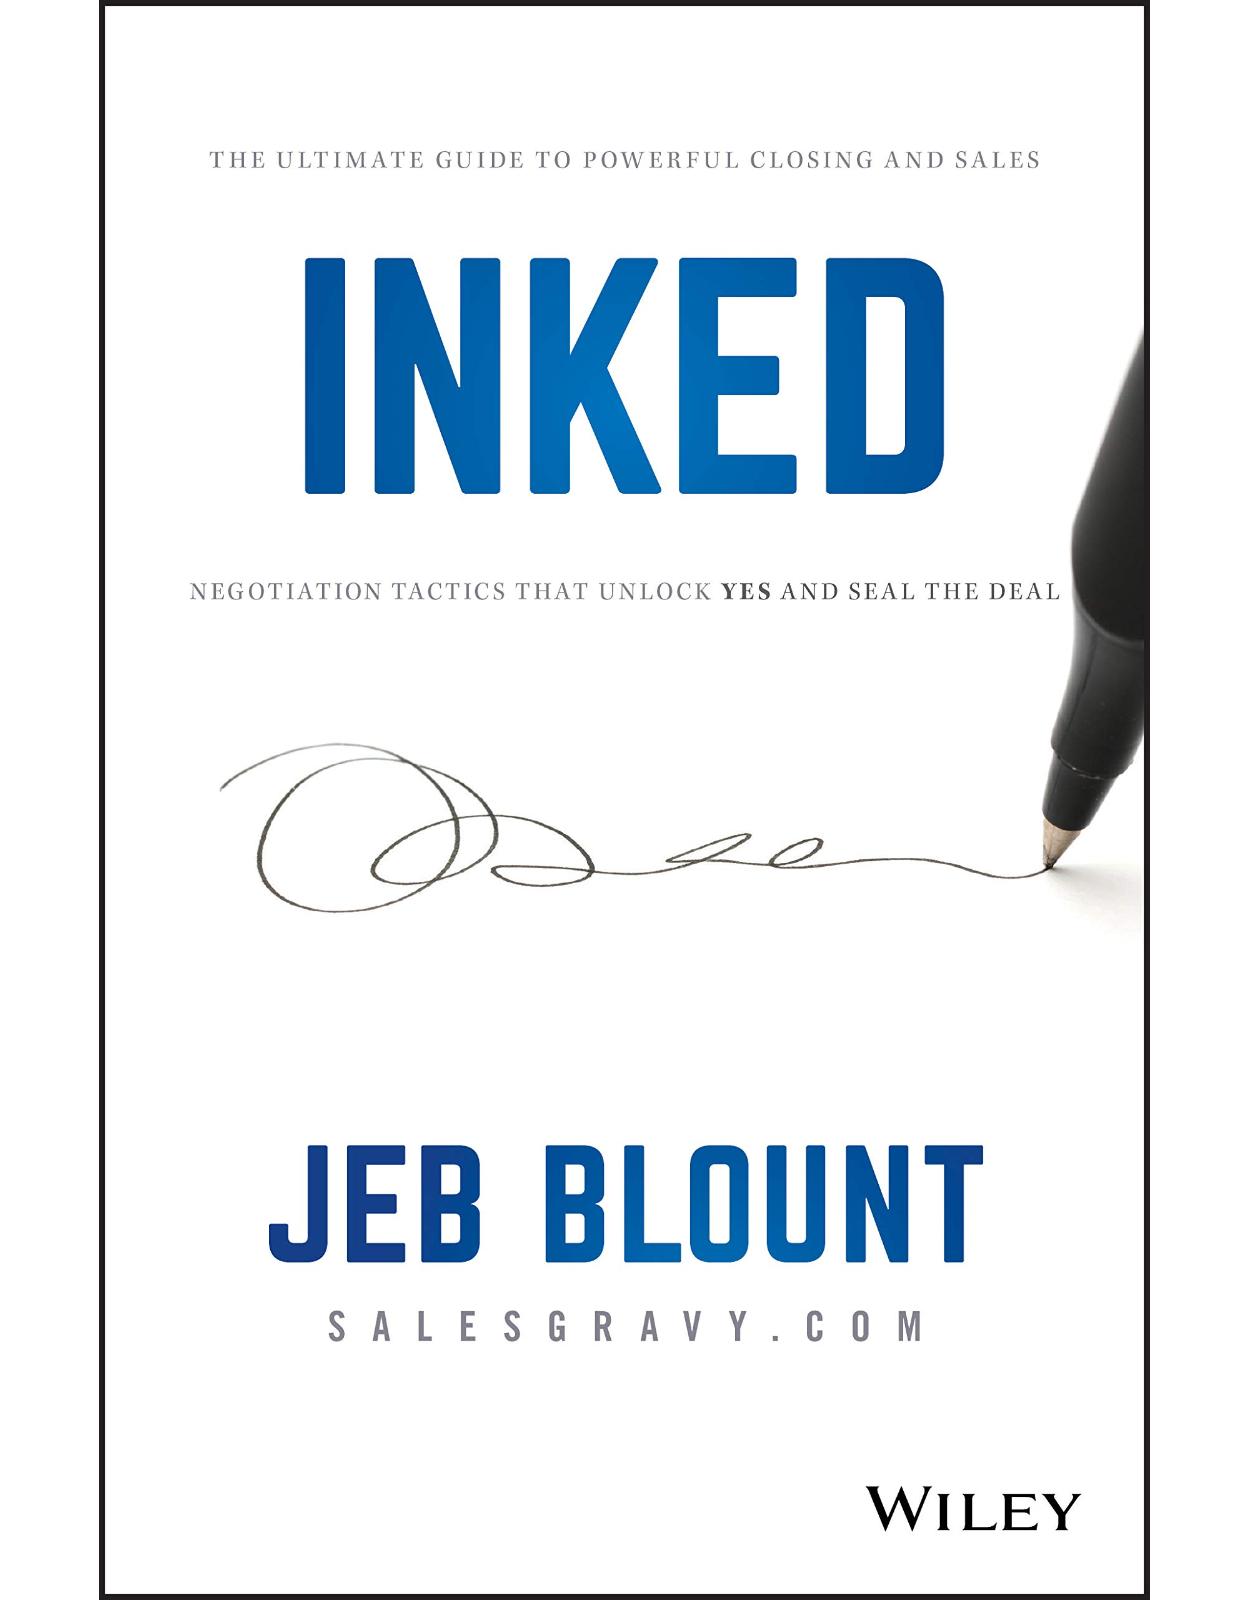 Inked: The Ultimate Guide to Powerful Closing and Sales Negotiation Tactics that Unlock YES and Seal the Deal